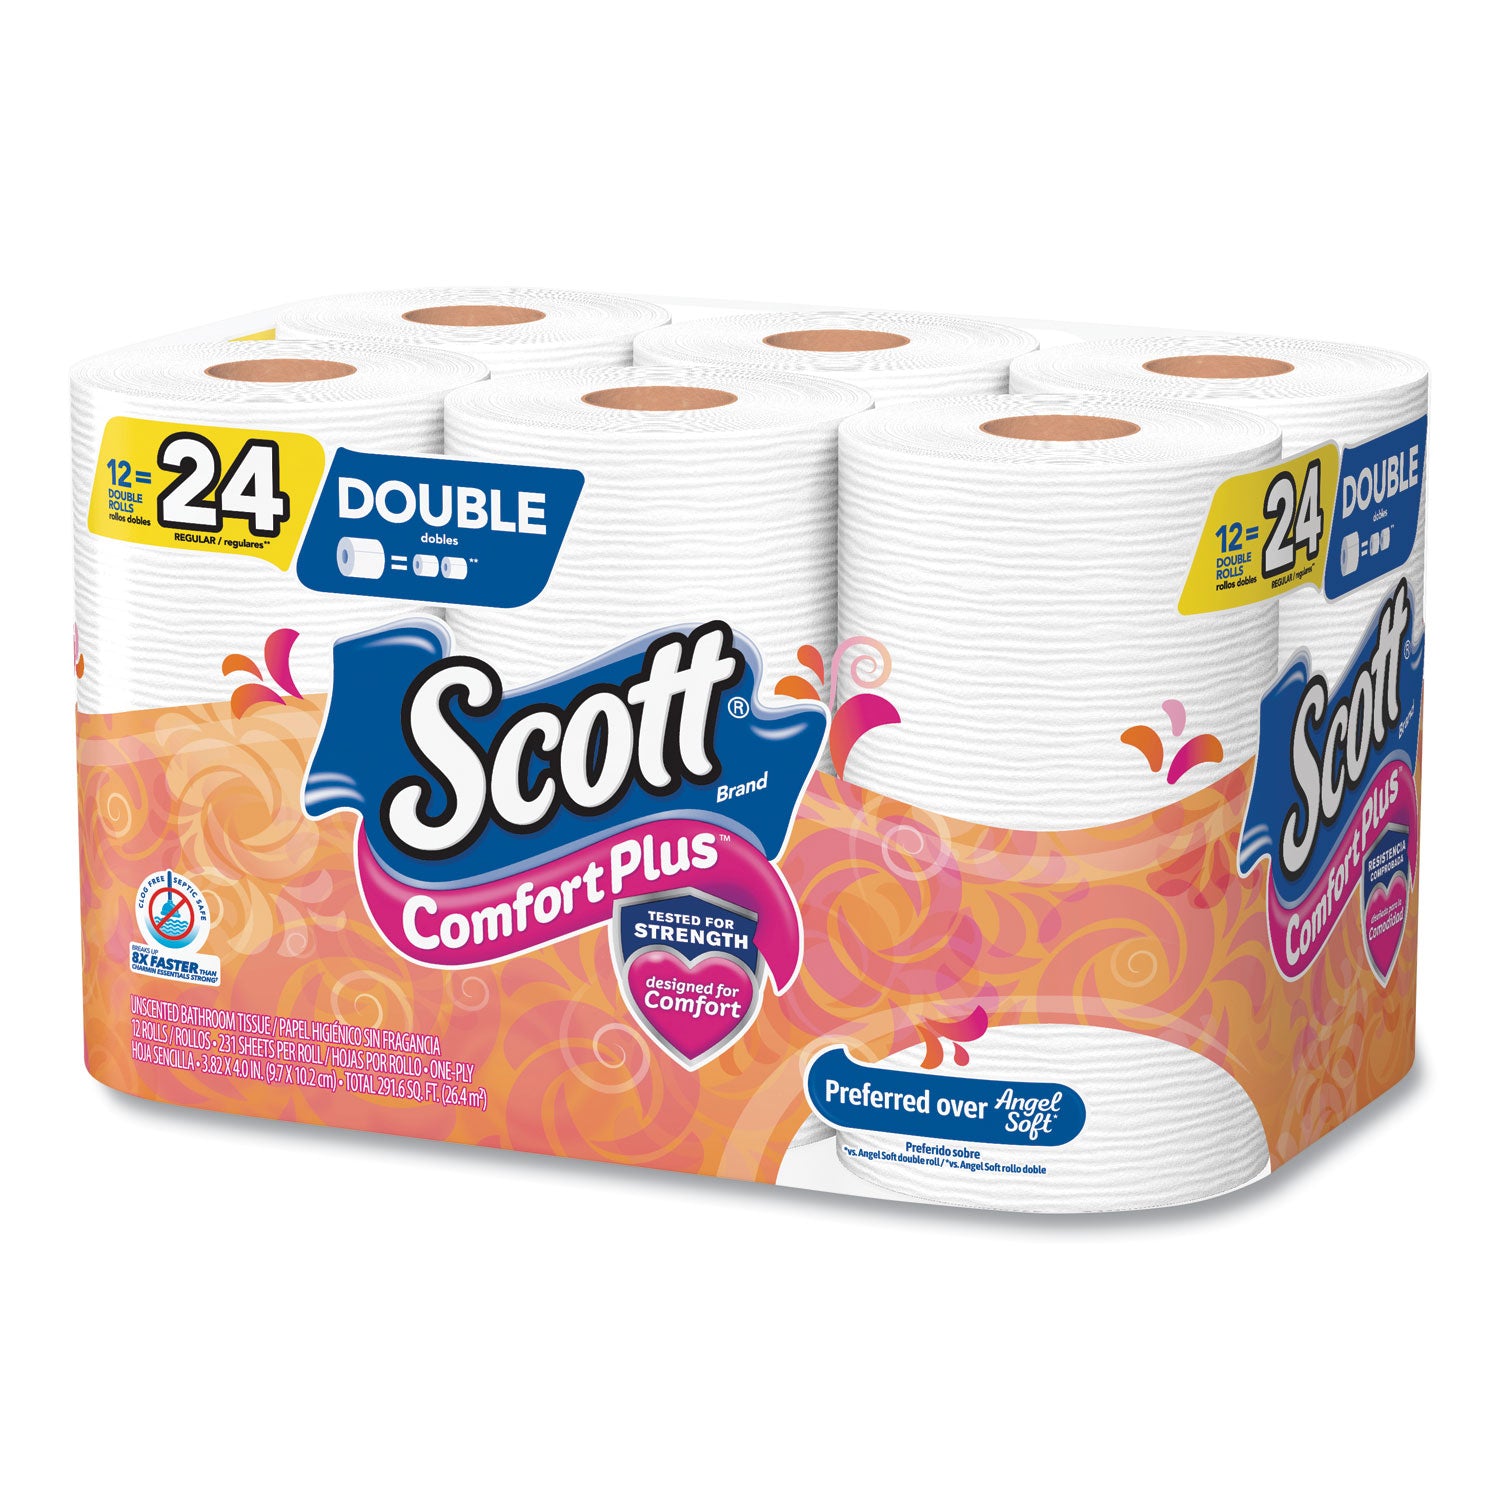 comfortplus-toilet-paper-double-roll-bath-tissue-septic-safe-1-ply-white-231-sheets-roll-12-rolls-pack-4-packs-carton_kcc47618 - 3